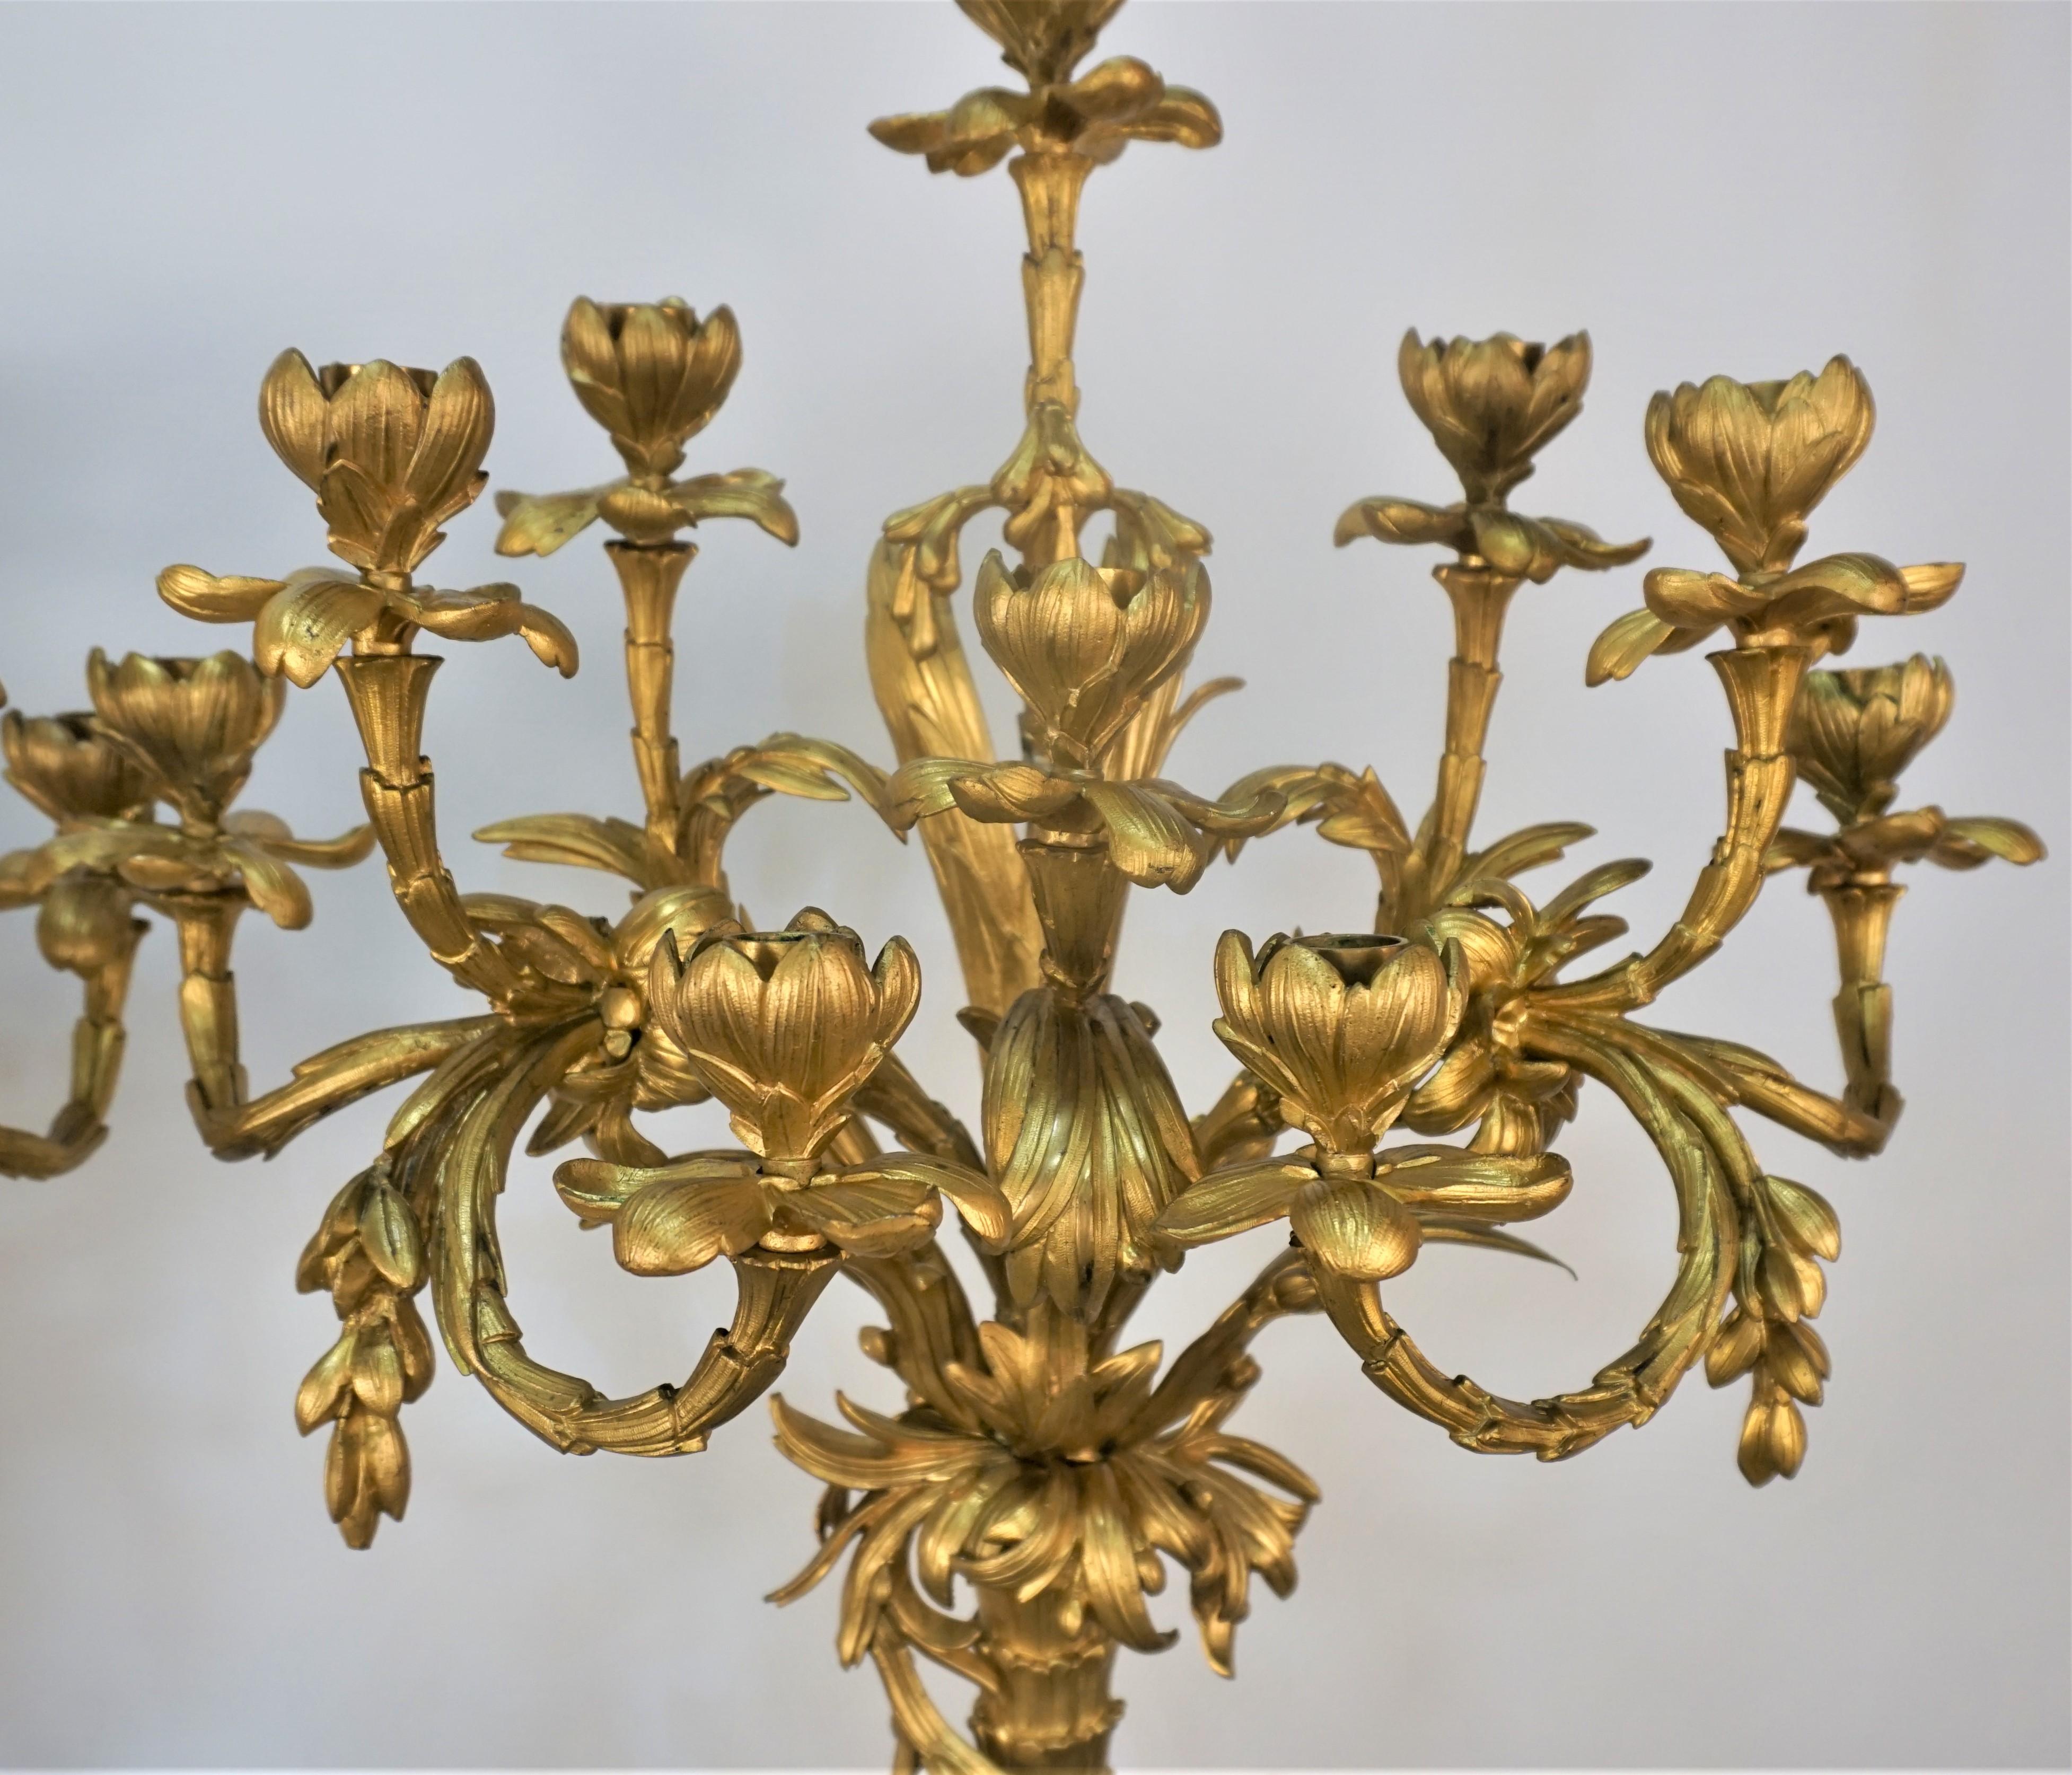 Pair of French Dore and patinated bronze Candelabra by Henri Picard 1